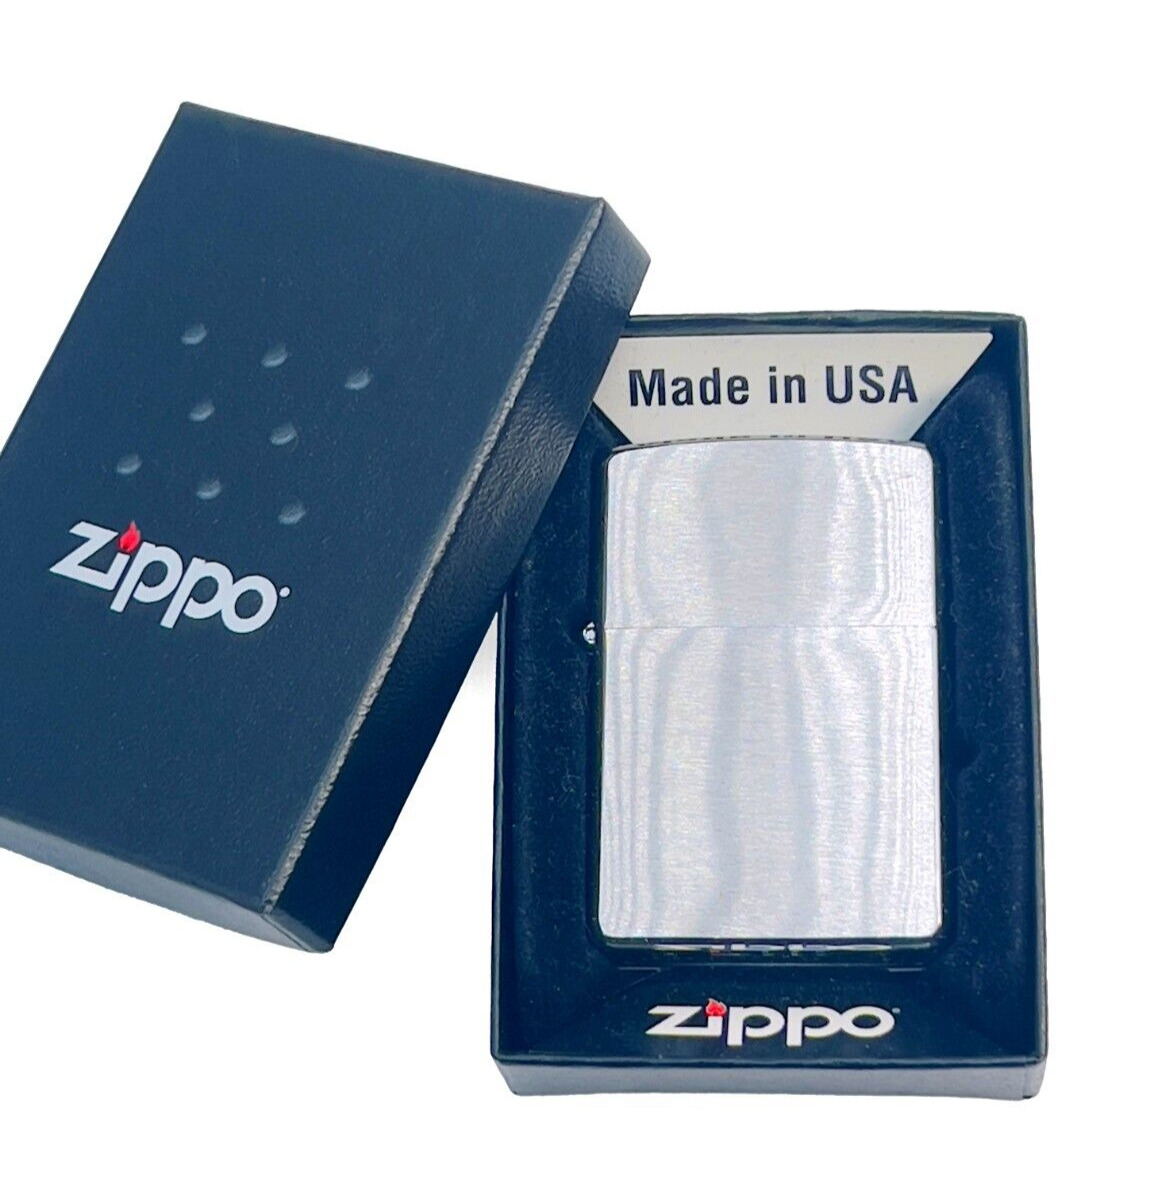 NEW 2009 Zippo Classic Brushed Chrome Windproof Pocket Lighter, 200